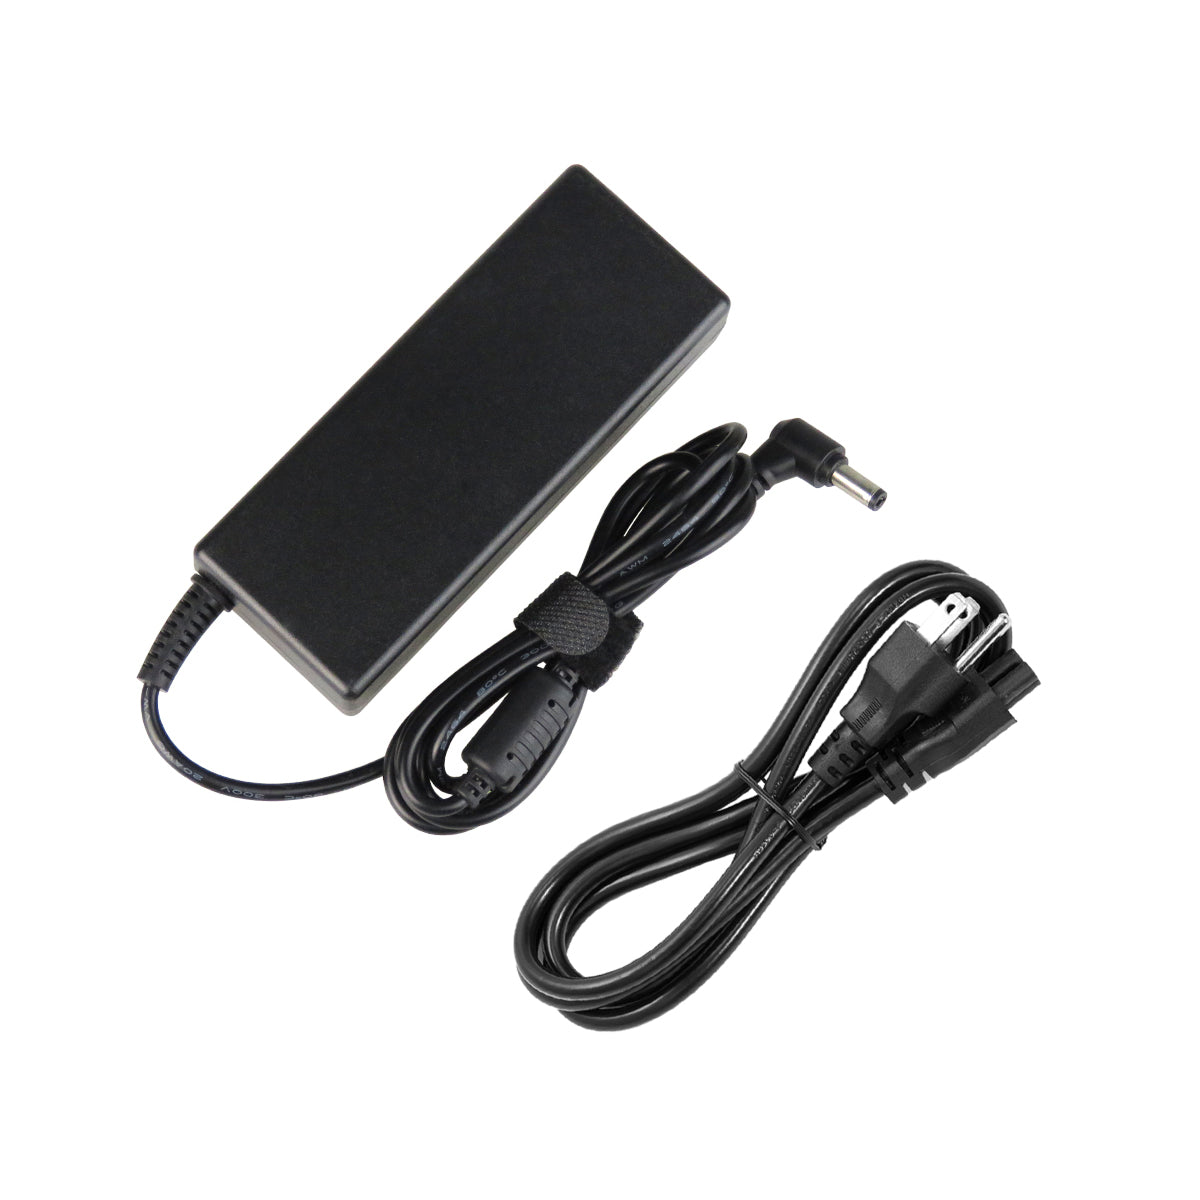 AC Adapter Charger for ASUS U58CA Notebook.